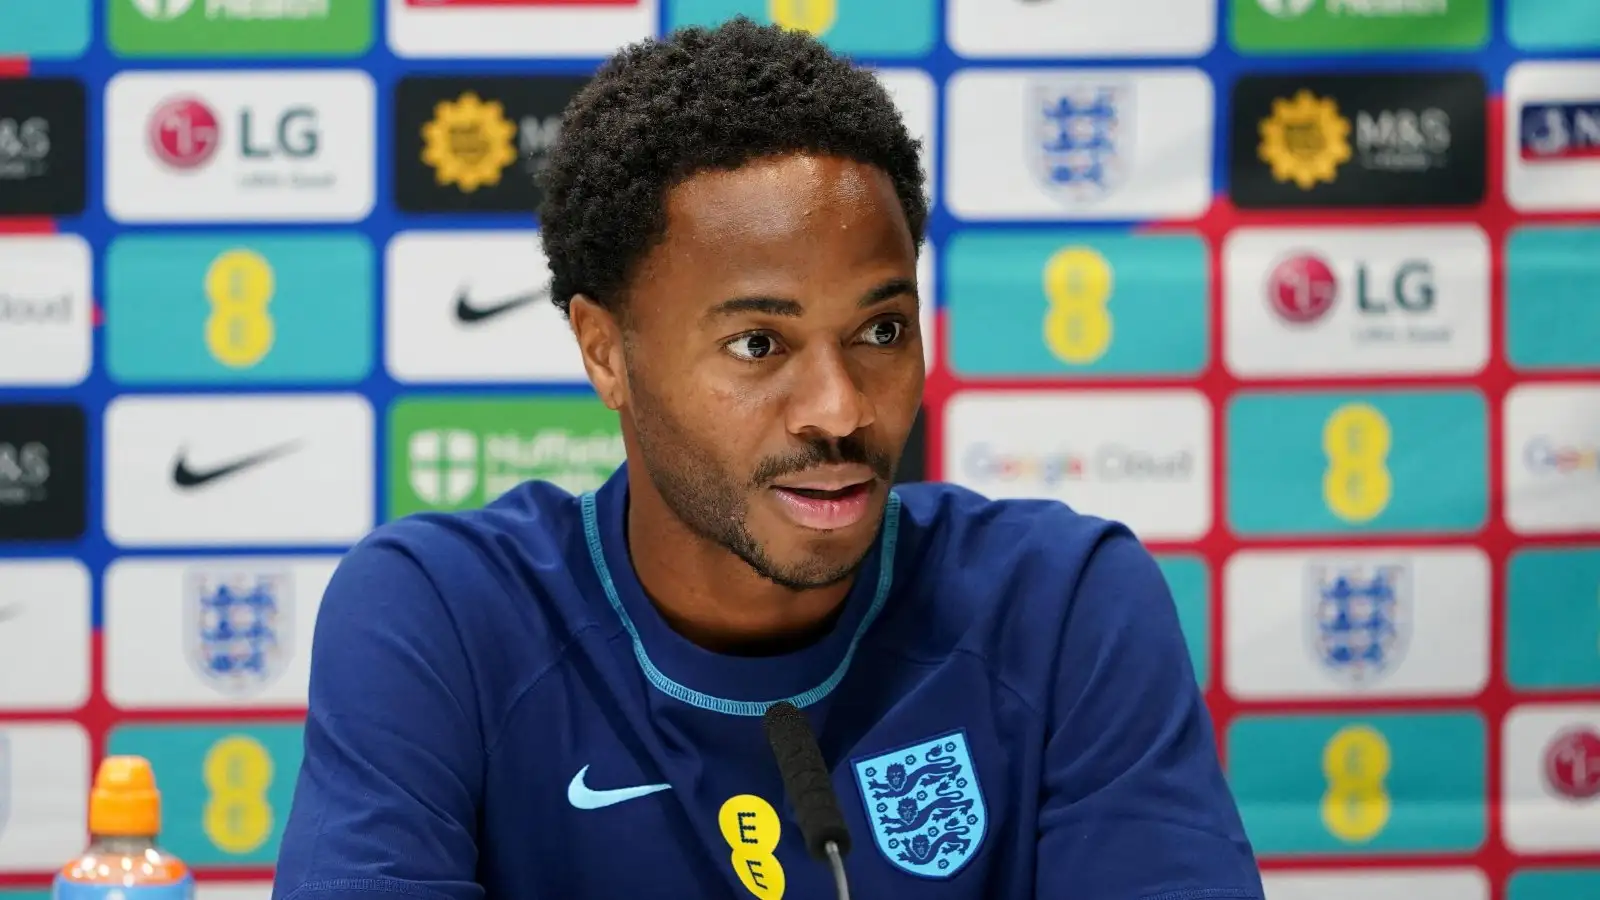 Raheem Sterling answers questions